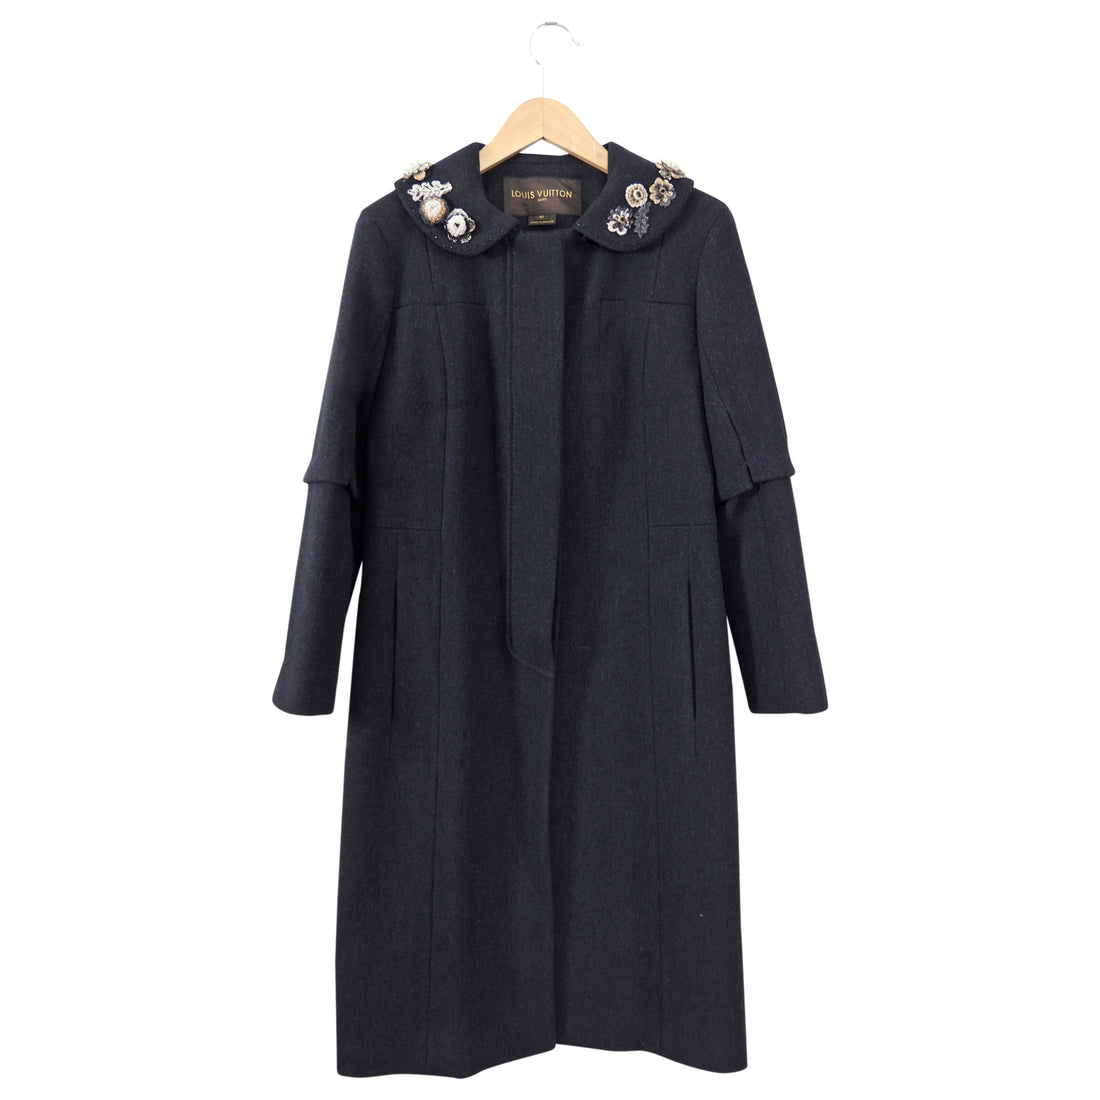 Louis Vuitton Charcoal Grey Floral Embroidered Coat - 38 / S